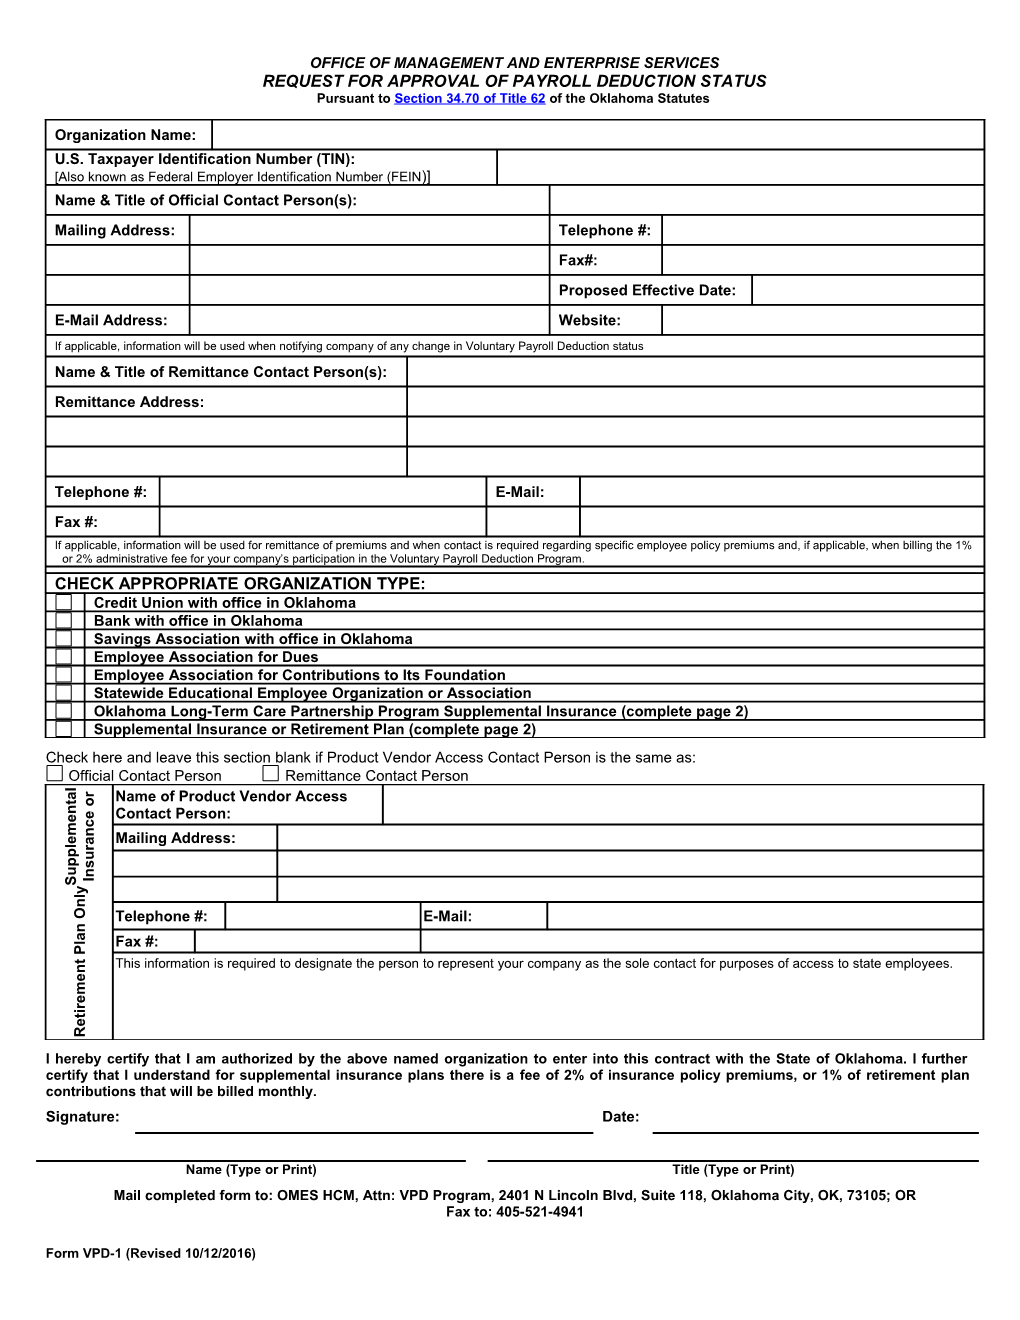 Payroll Deduction Status Request Form